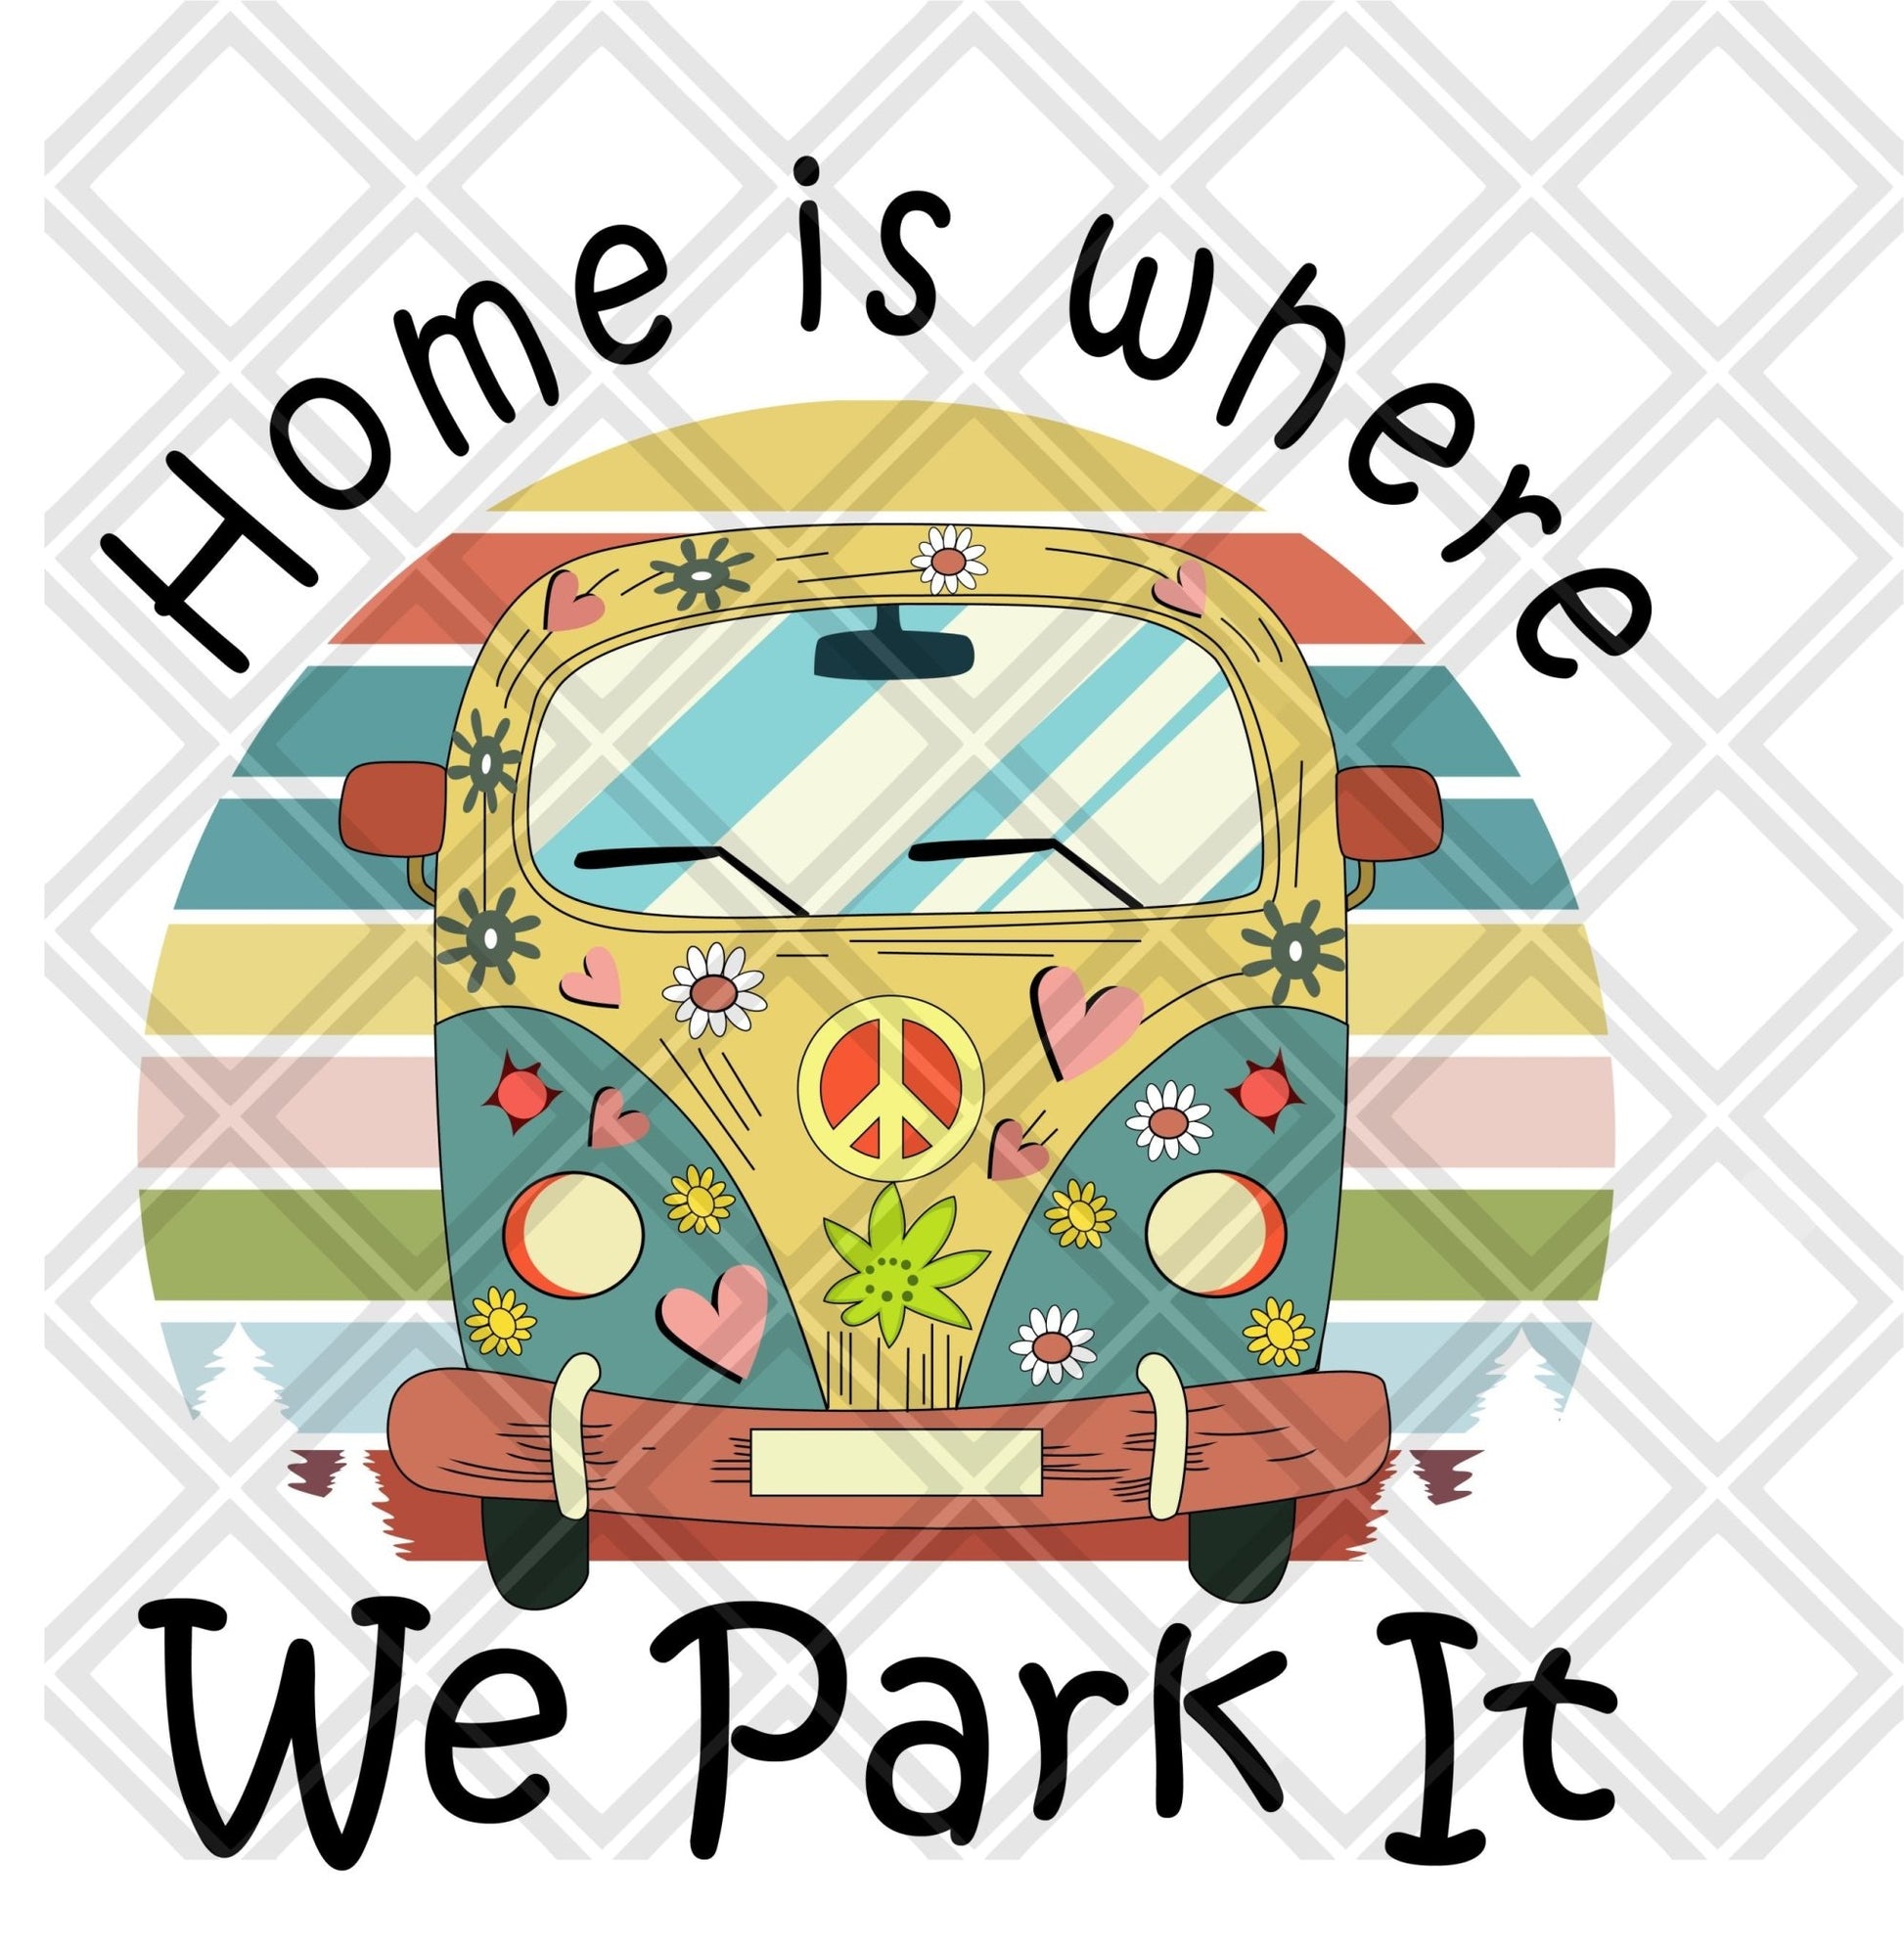 Home is where we park it frame Digital Download Instand Download - Do it yourself Transfers